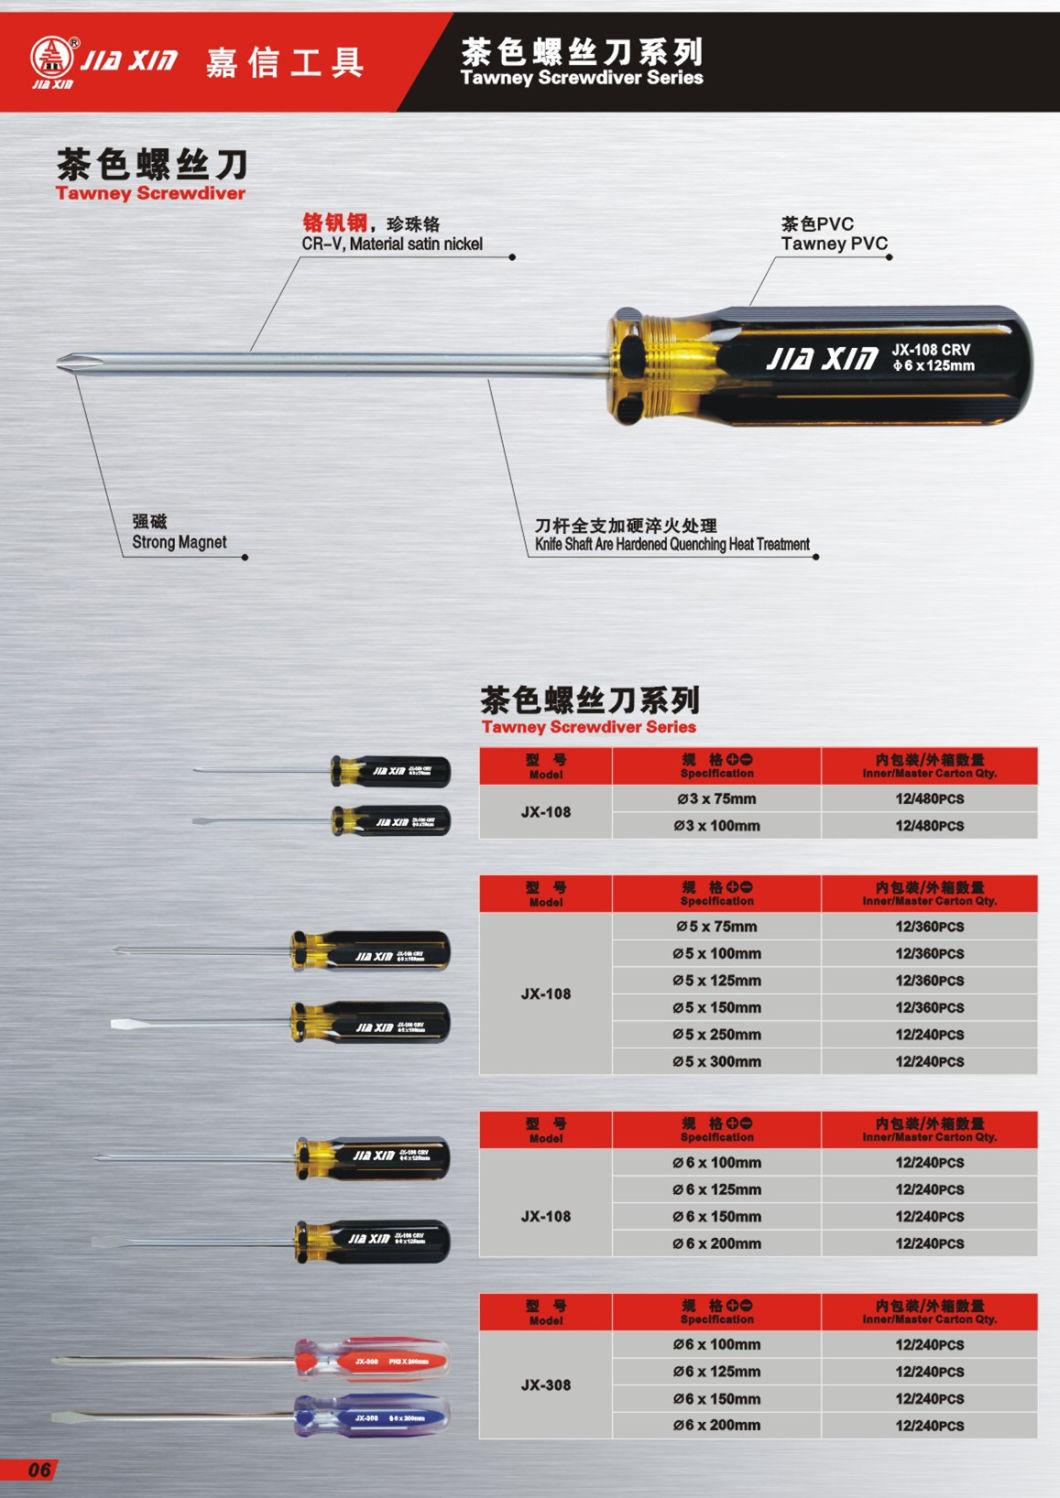 75mm-300mm High Quality Cr-V Phillips Screwdriver with Plastic Handle